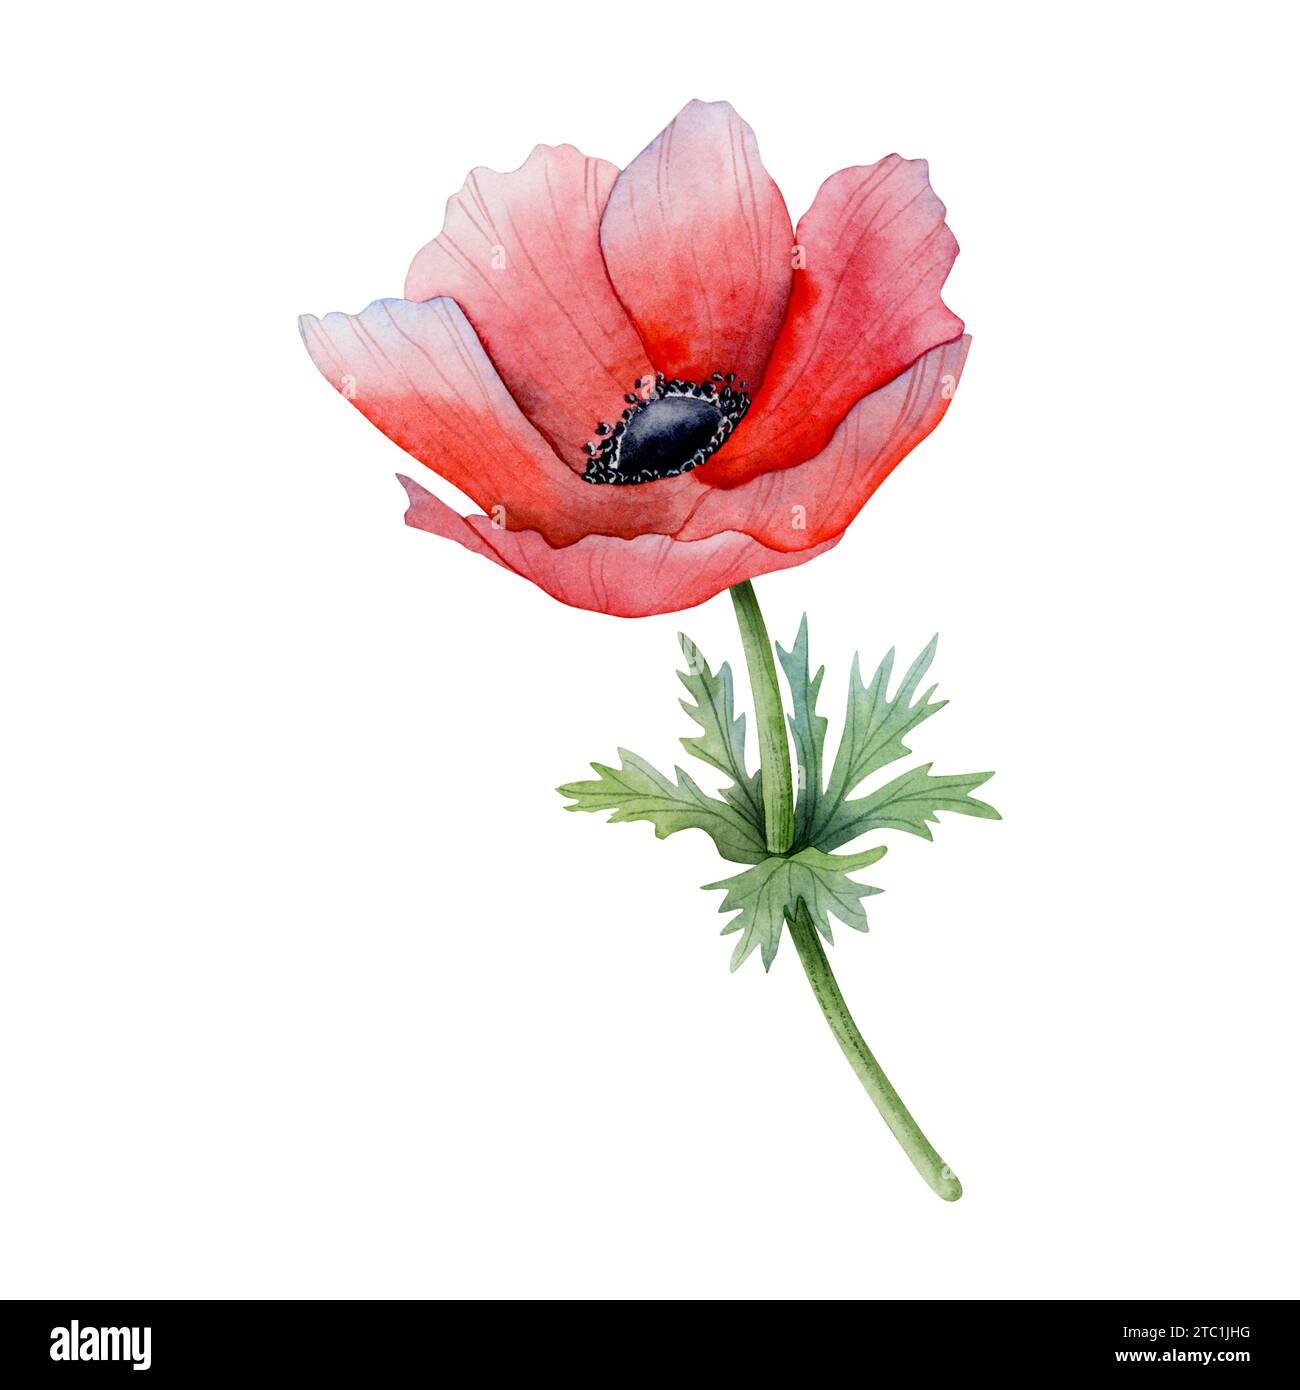 Red anemone with green flowers and stem floral watercolor illustration. Field poppy flower with seeds for spring design Stock Photo